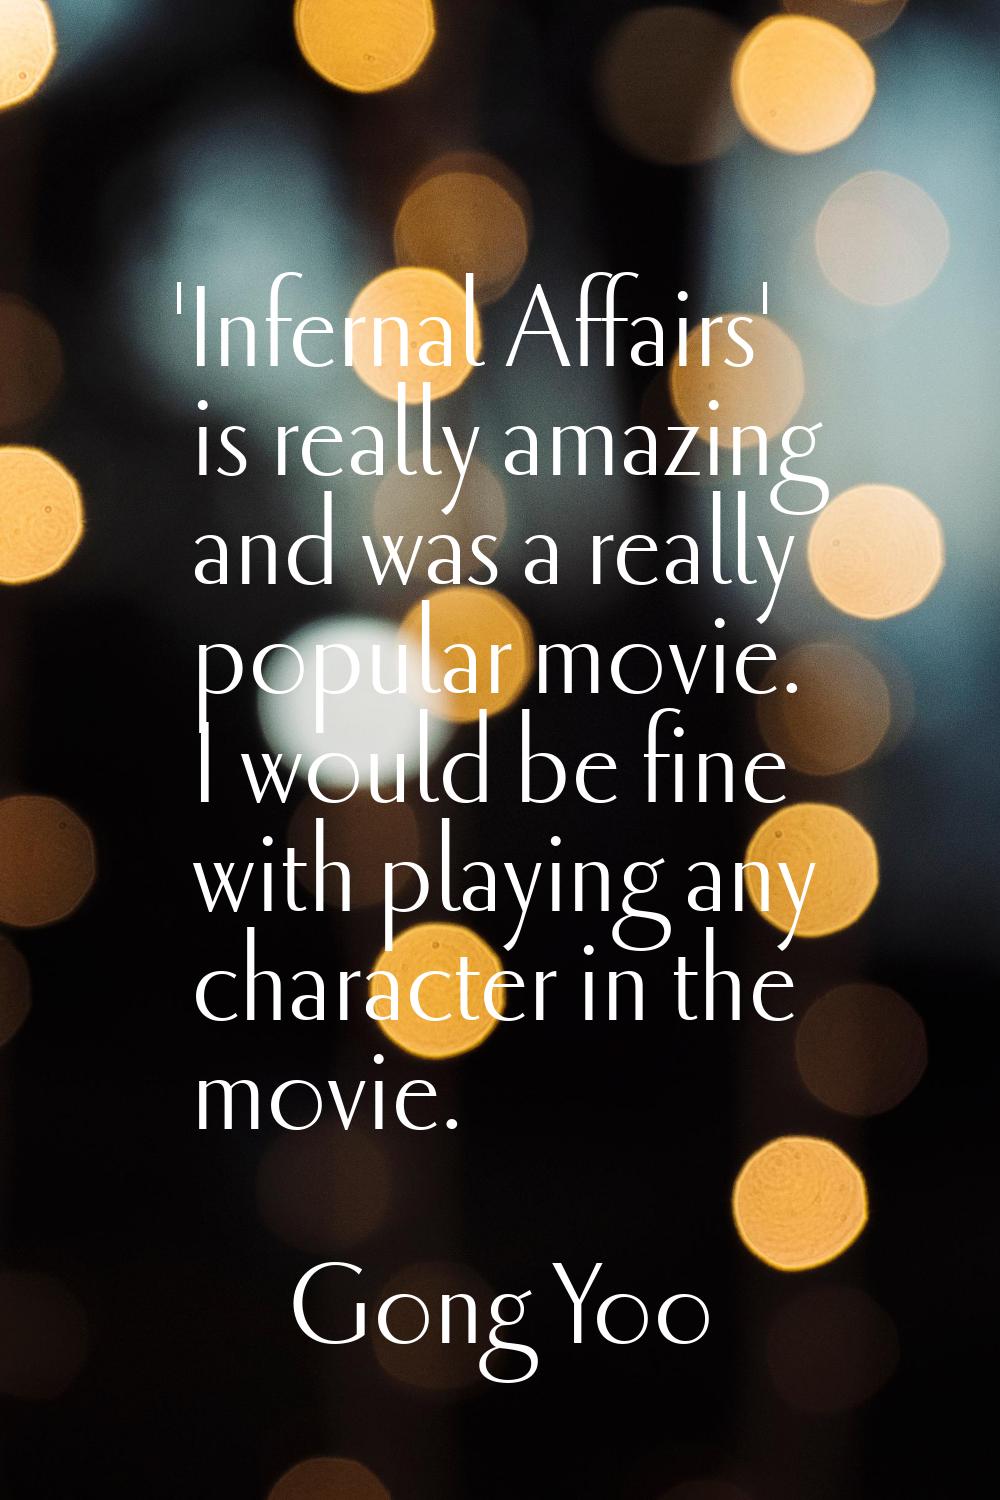 'Infernal Affairs' is really amazing and was a really popular movie. I would be fine with playing a